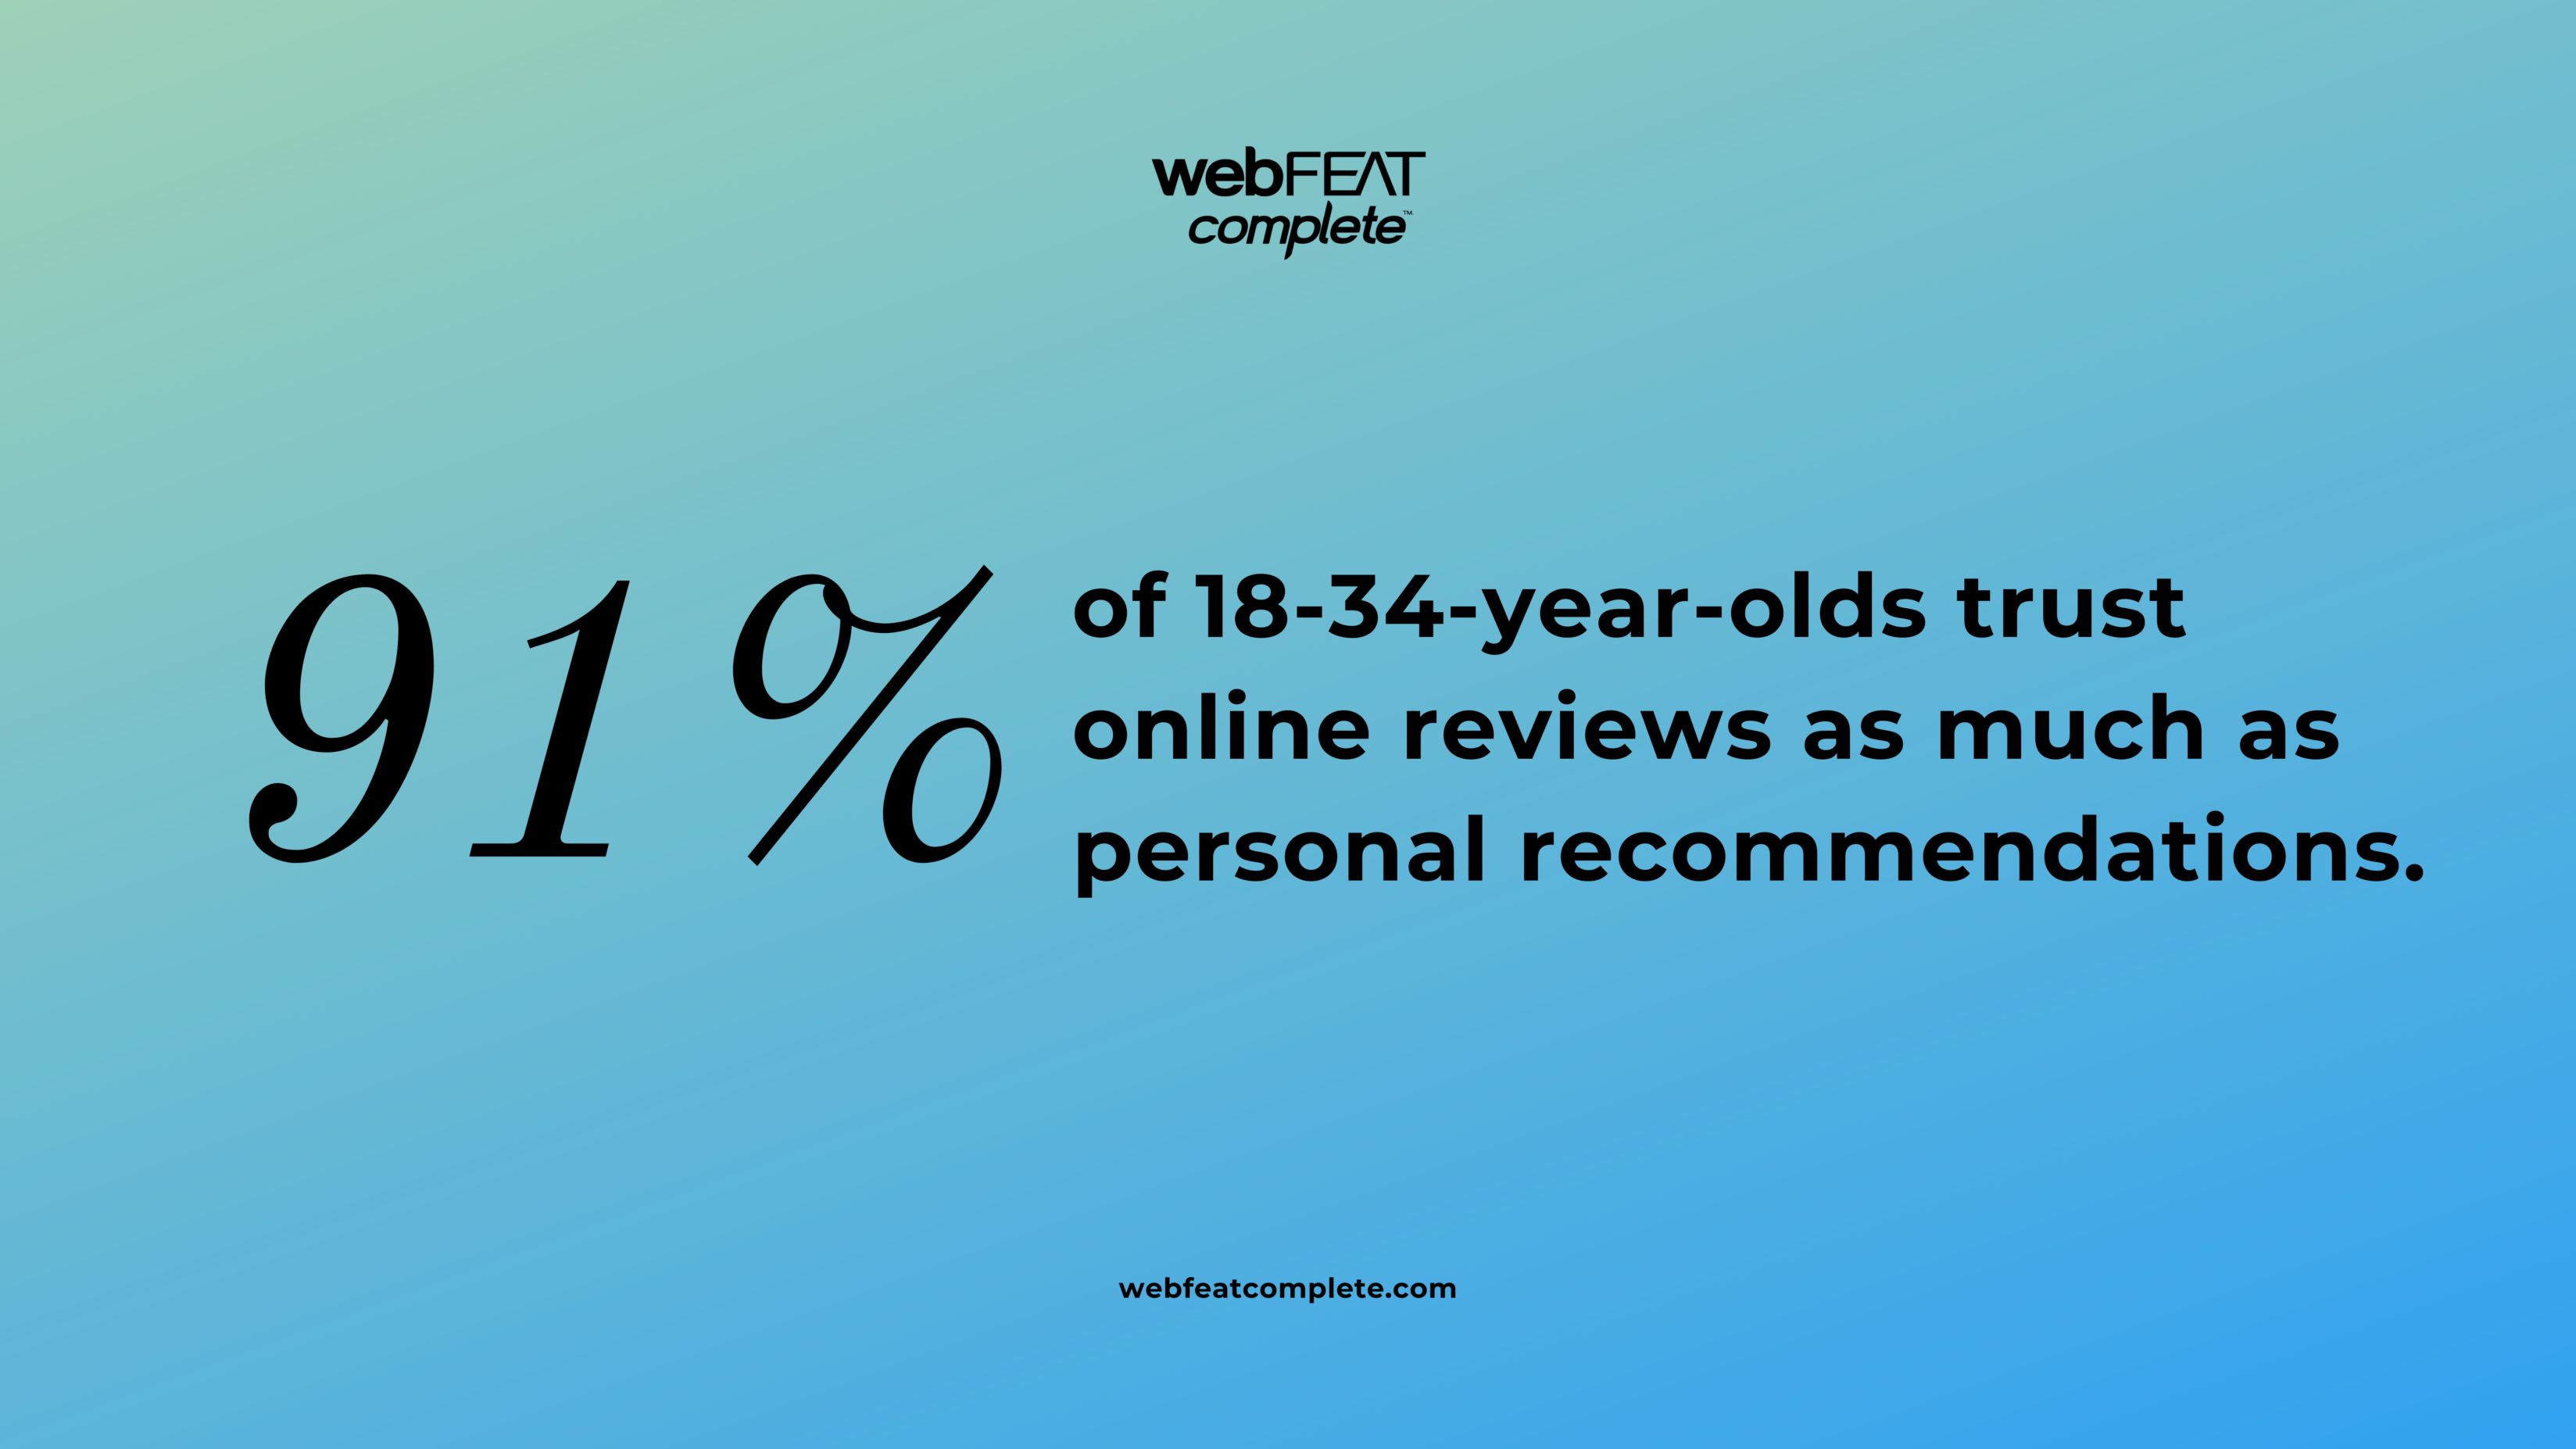 91% of 18-34-year-olds trust online reviews as much as personal recommendations.